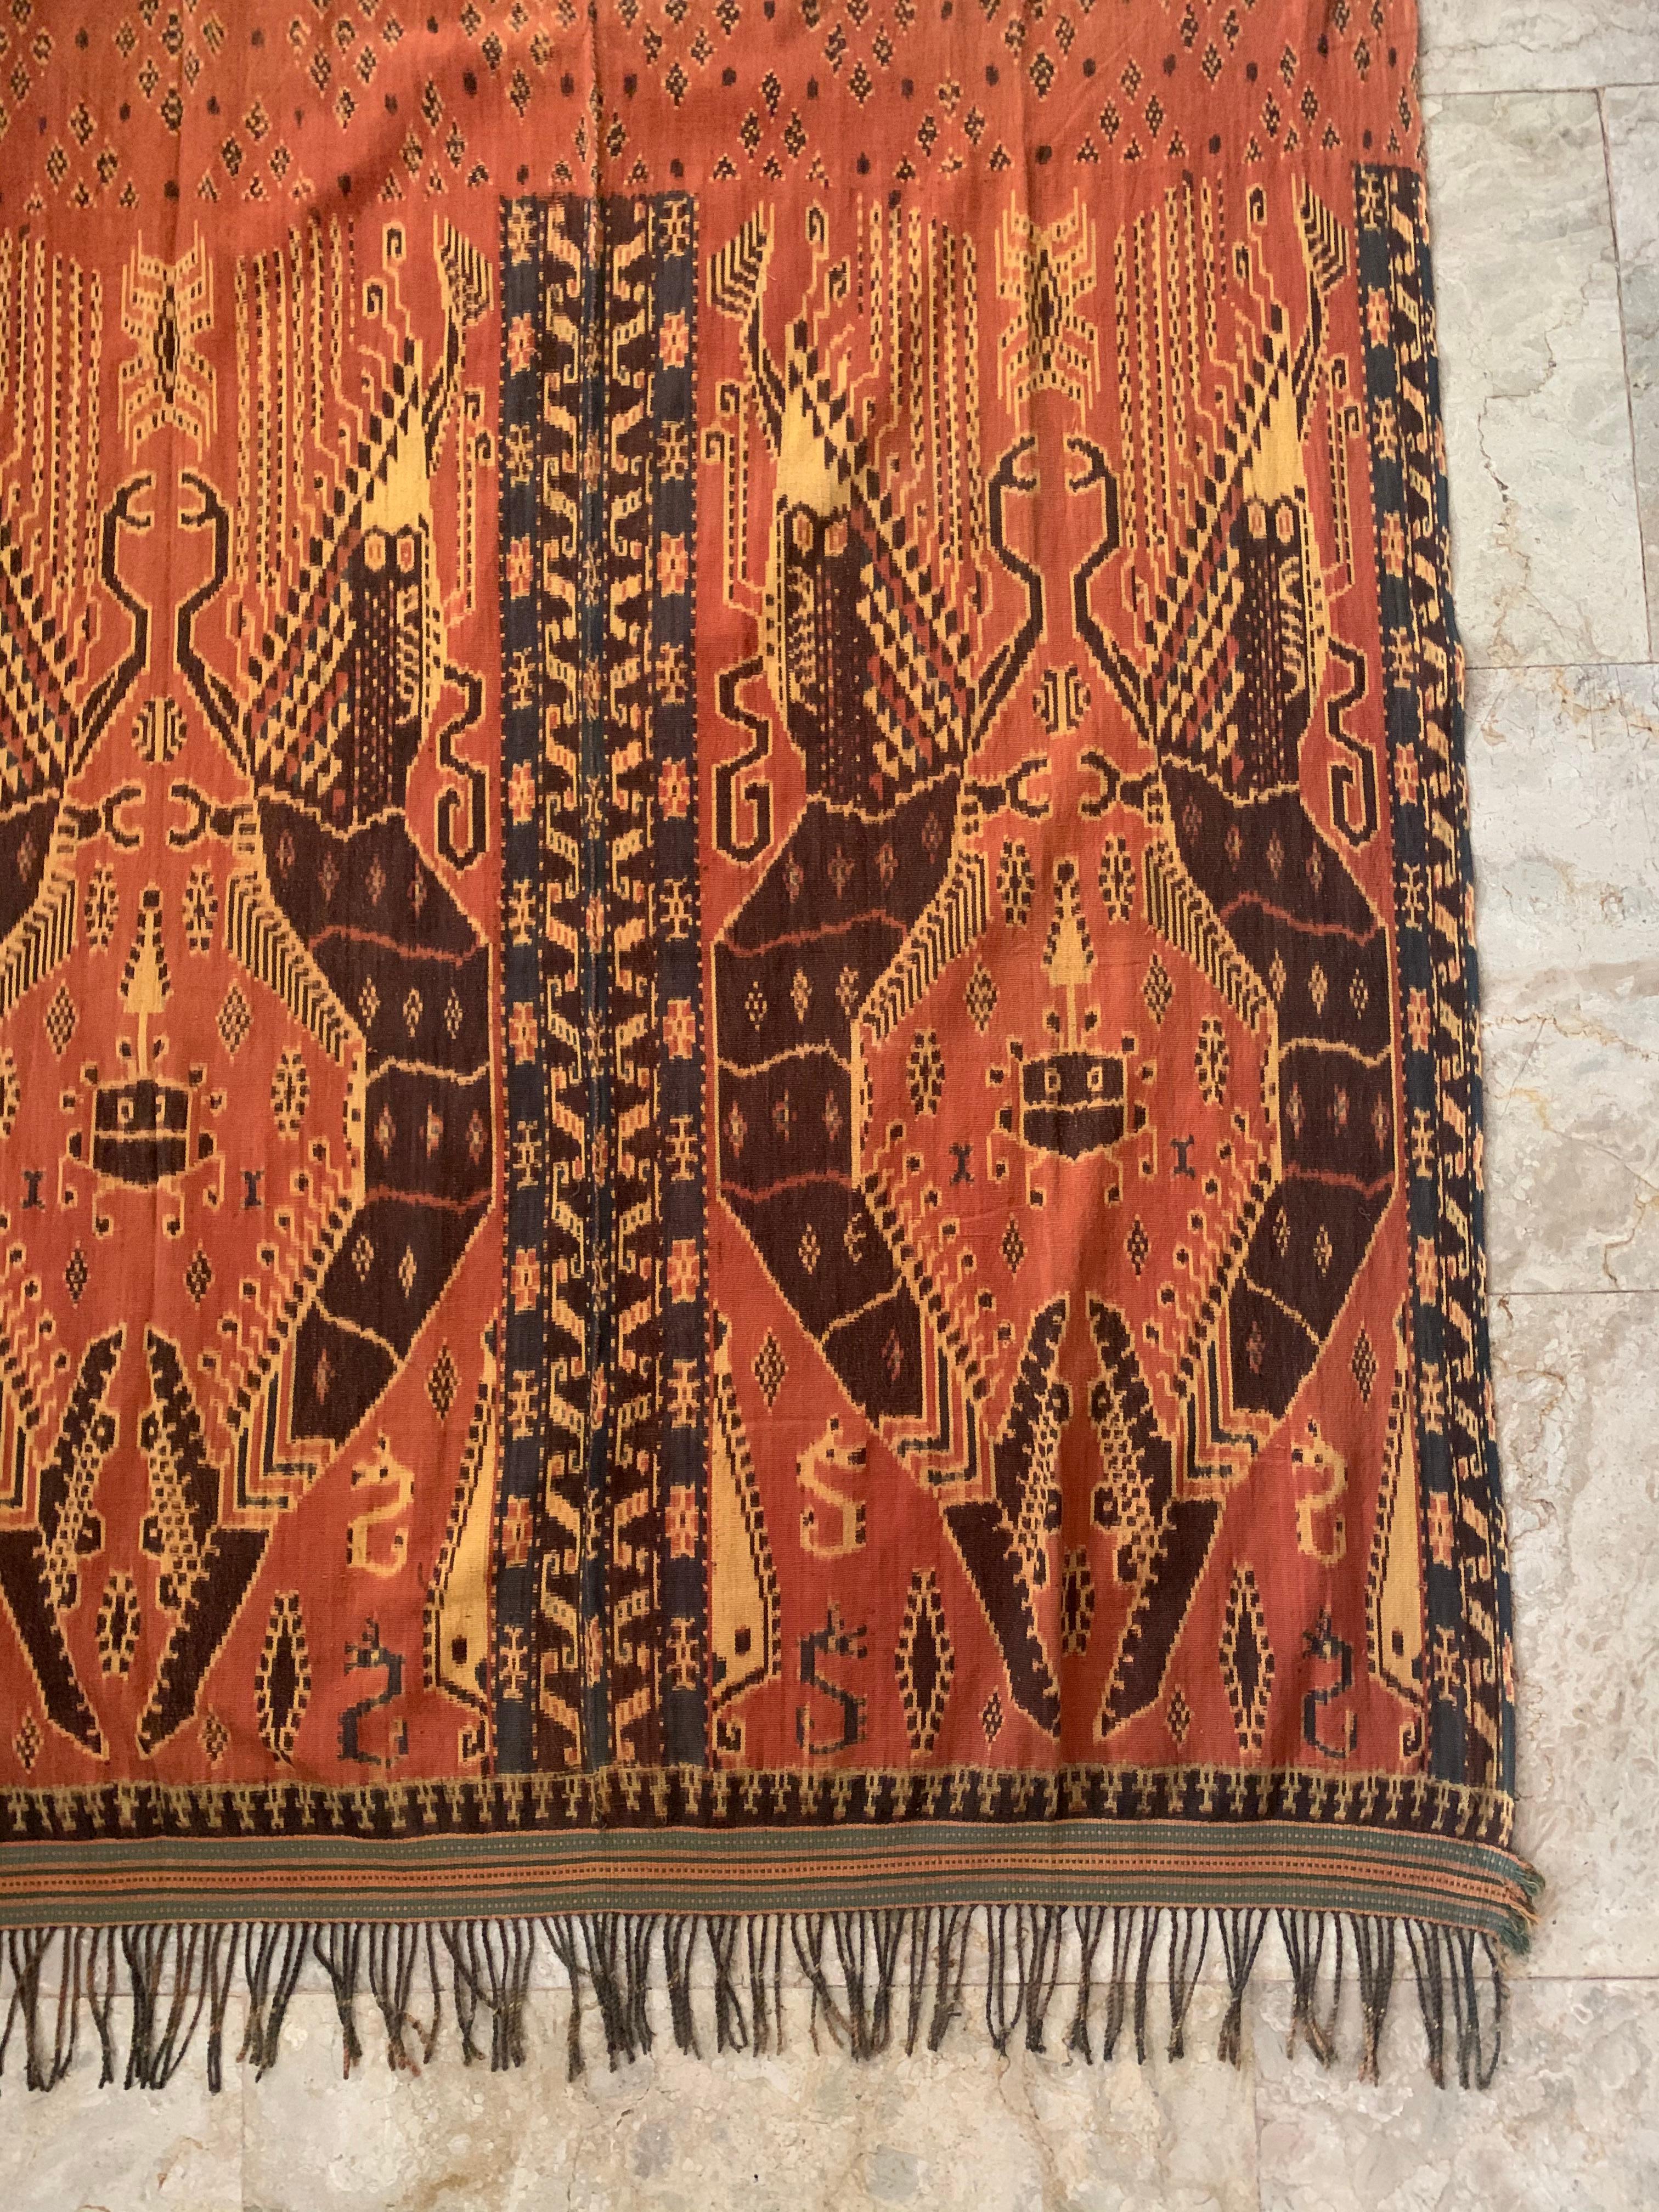 This Ikat textile originates from the Island of Sumba, Indonesia. It is hand-woven using naturally dyed yarns via a method passed on through generations. It features a stunning array of distinct tribal patterns as well as lobster motifs. This ikat